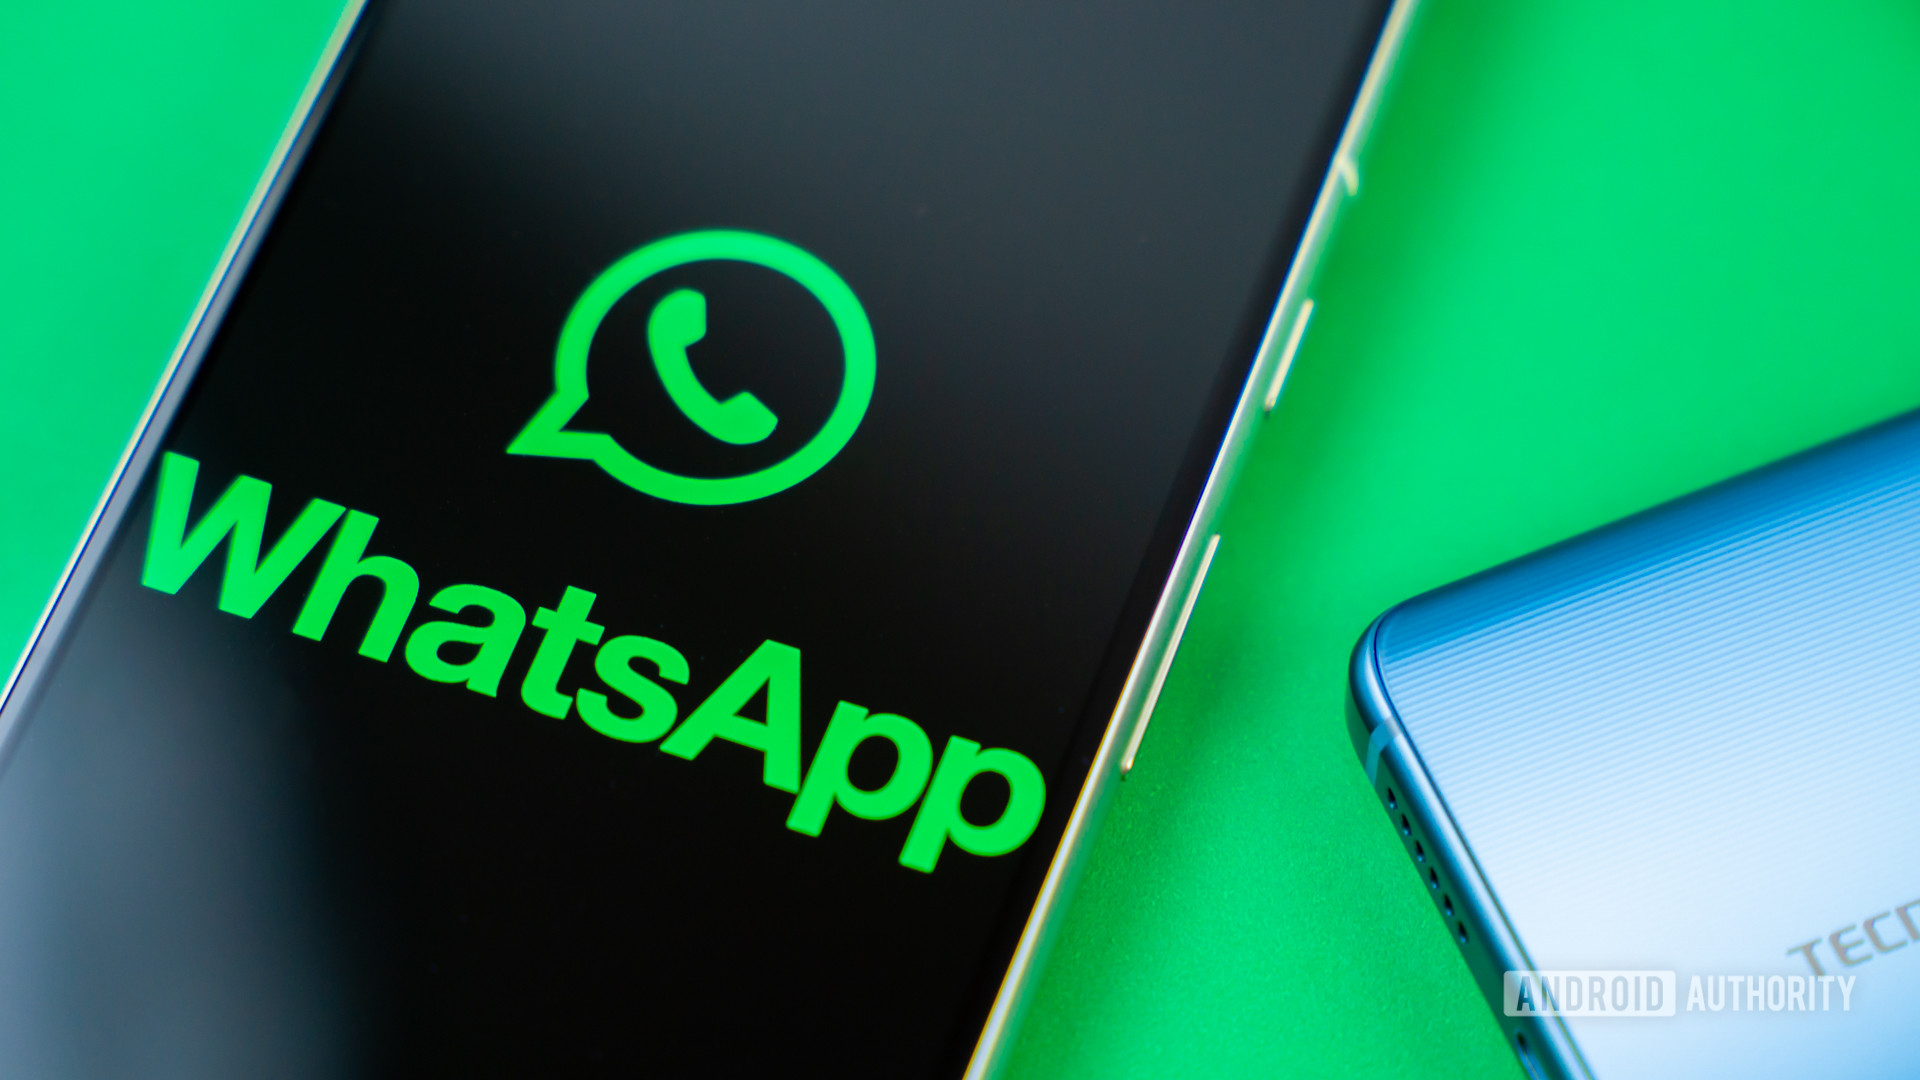 WhatsApp logo on smartphone next to other devices Stock photo 5